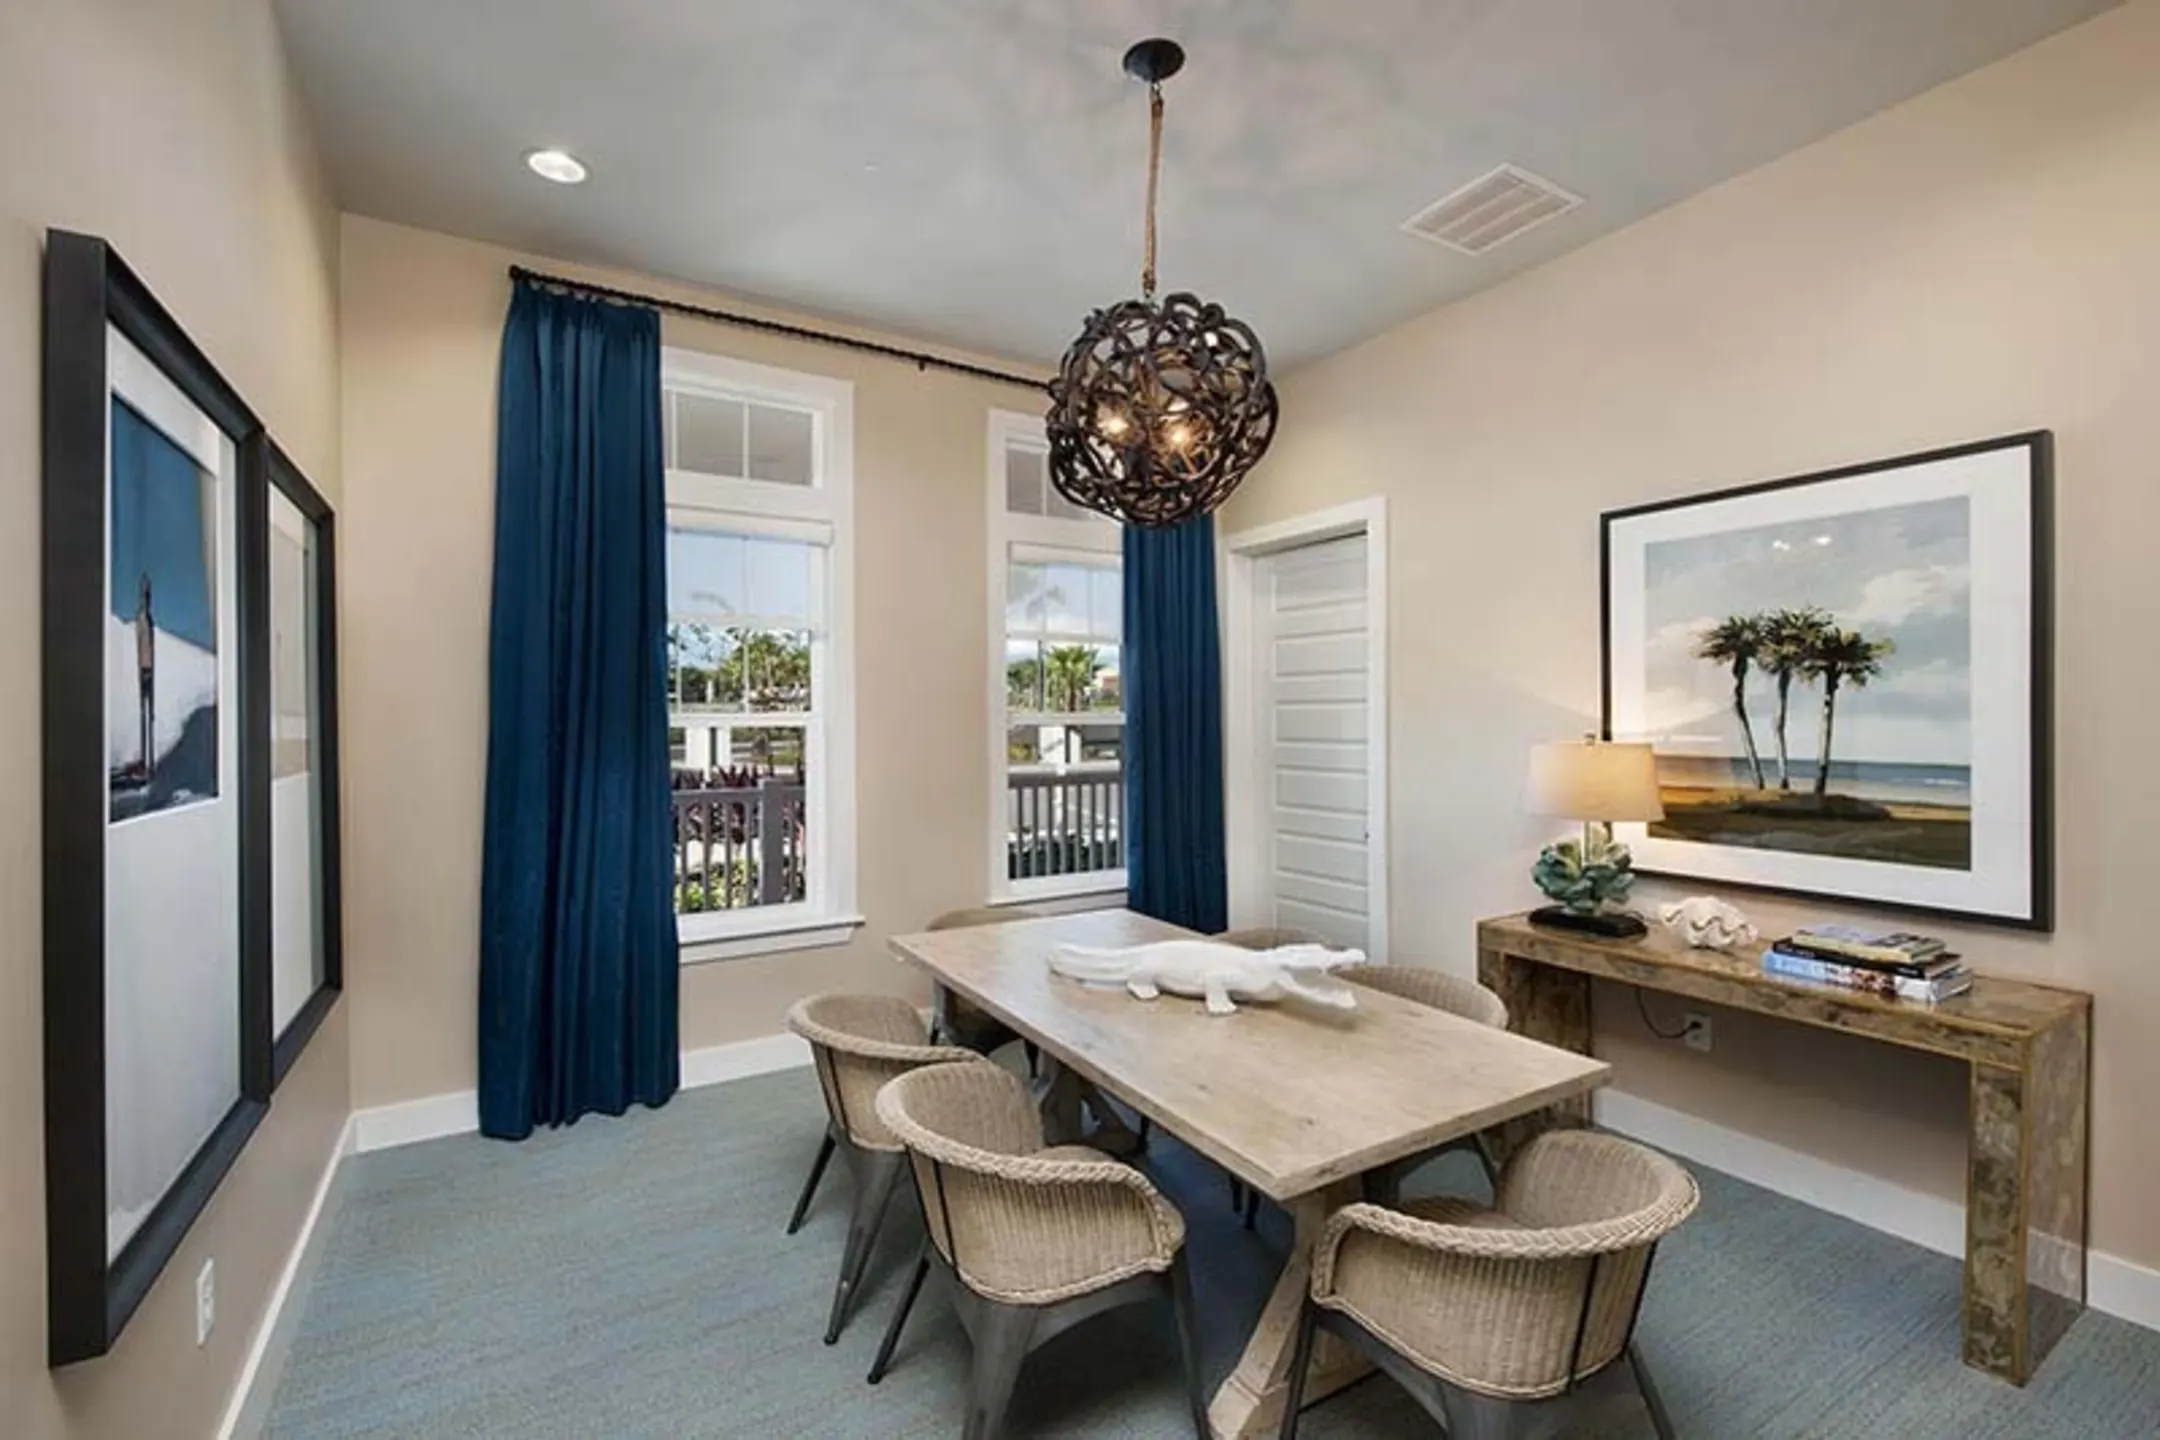 Dining Room - Solaris Key - Clearwater, FL